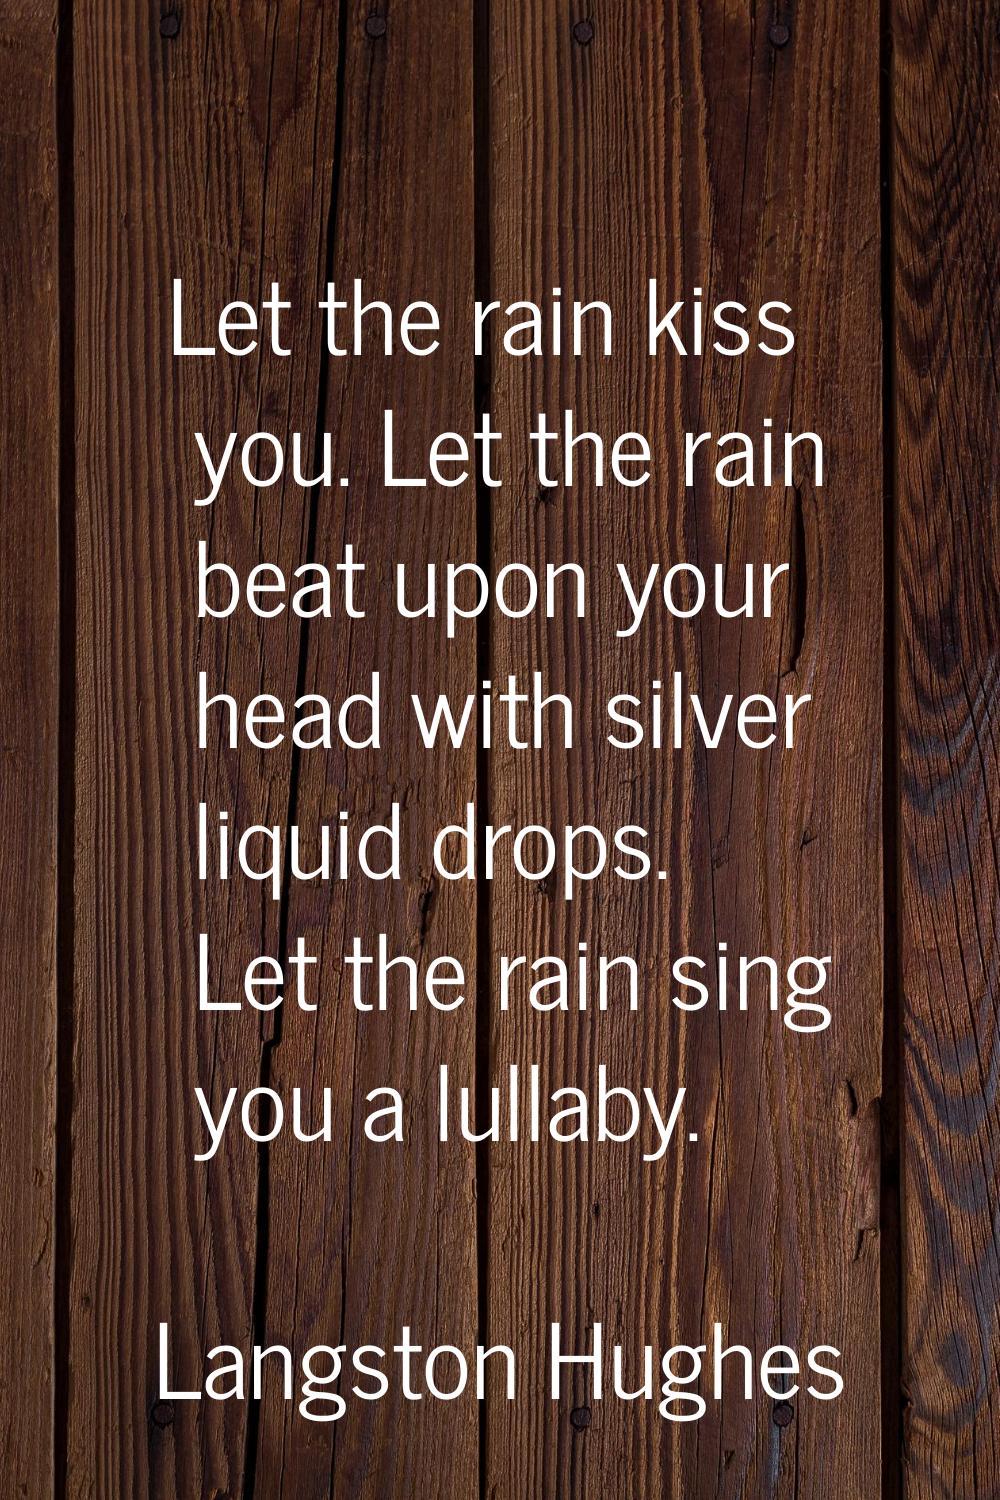 Let the rain kiss you. Let the rain beat upon your head with silver liquid drops. Let the rain sing